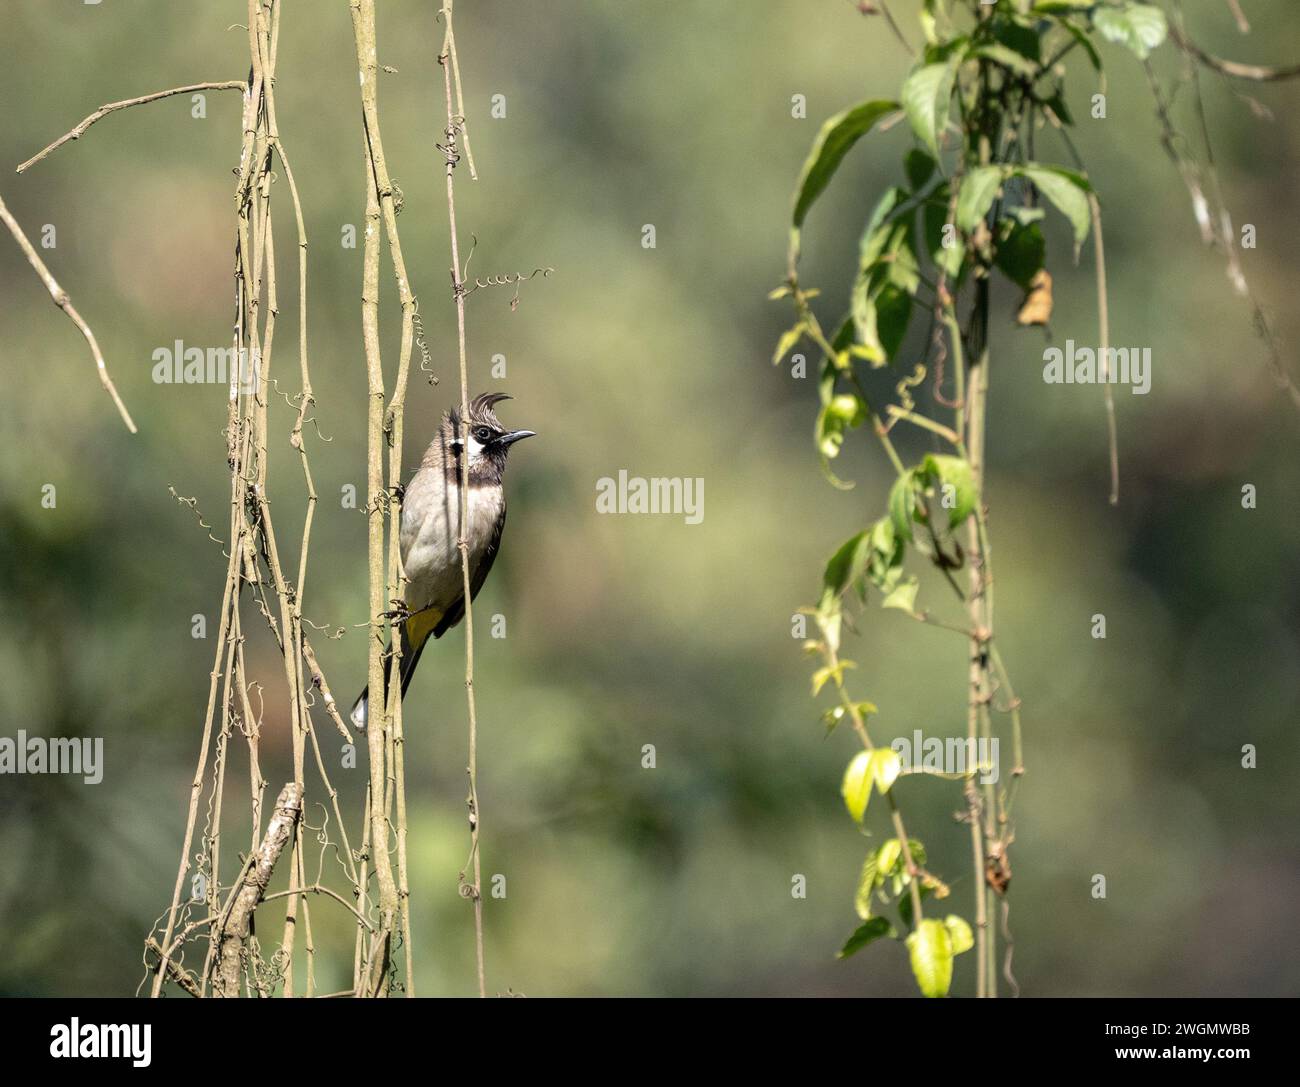 A Himalayan Bulbul perched on some Vines Stock Photo